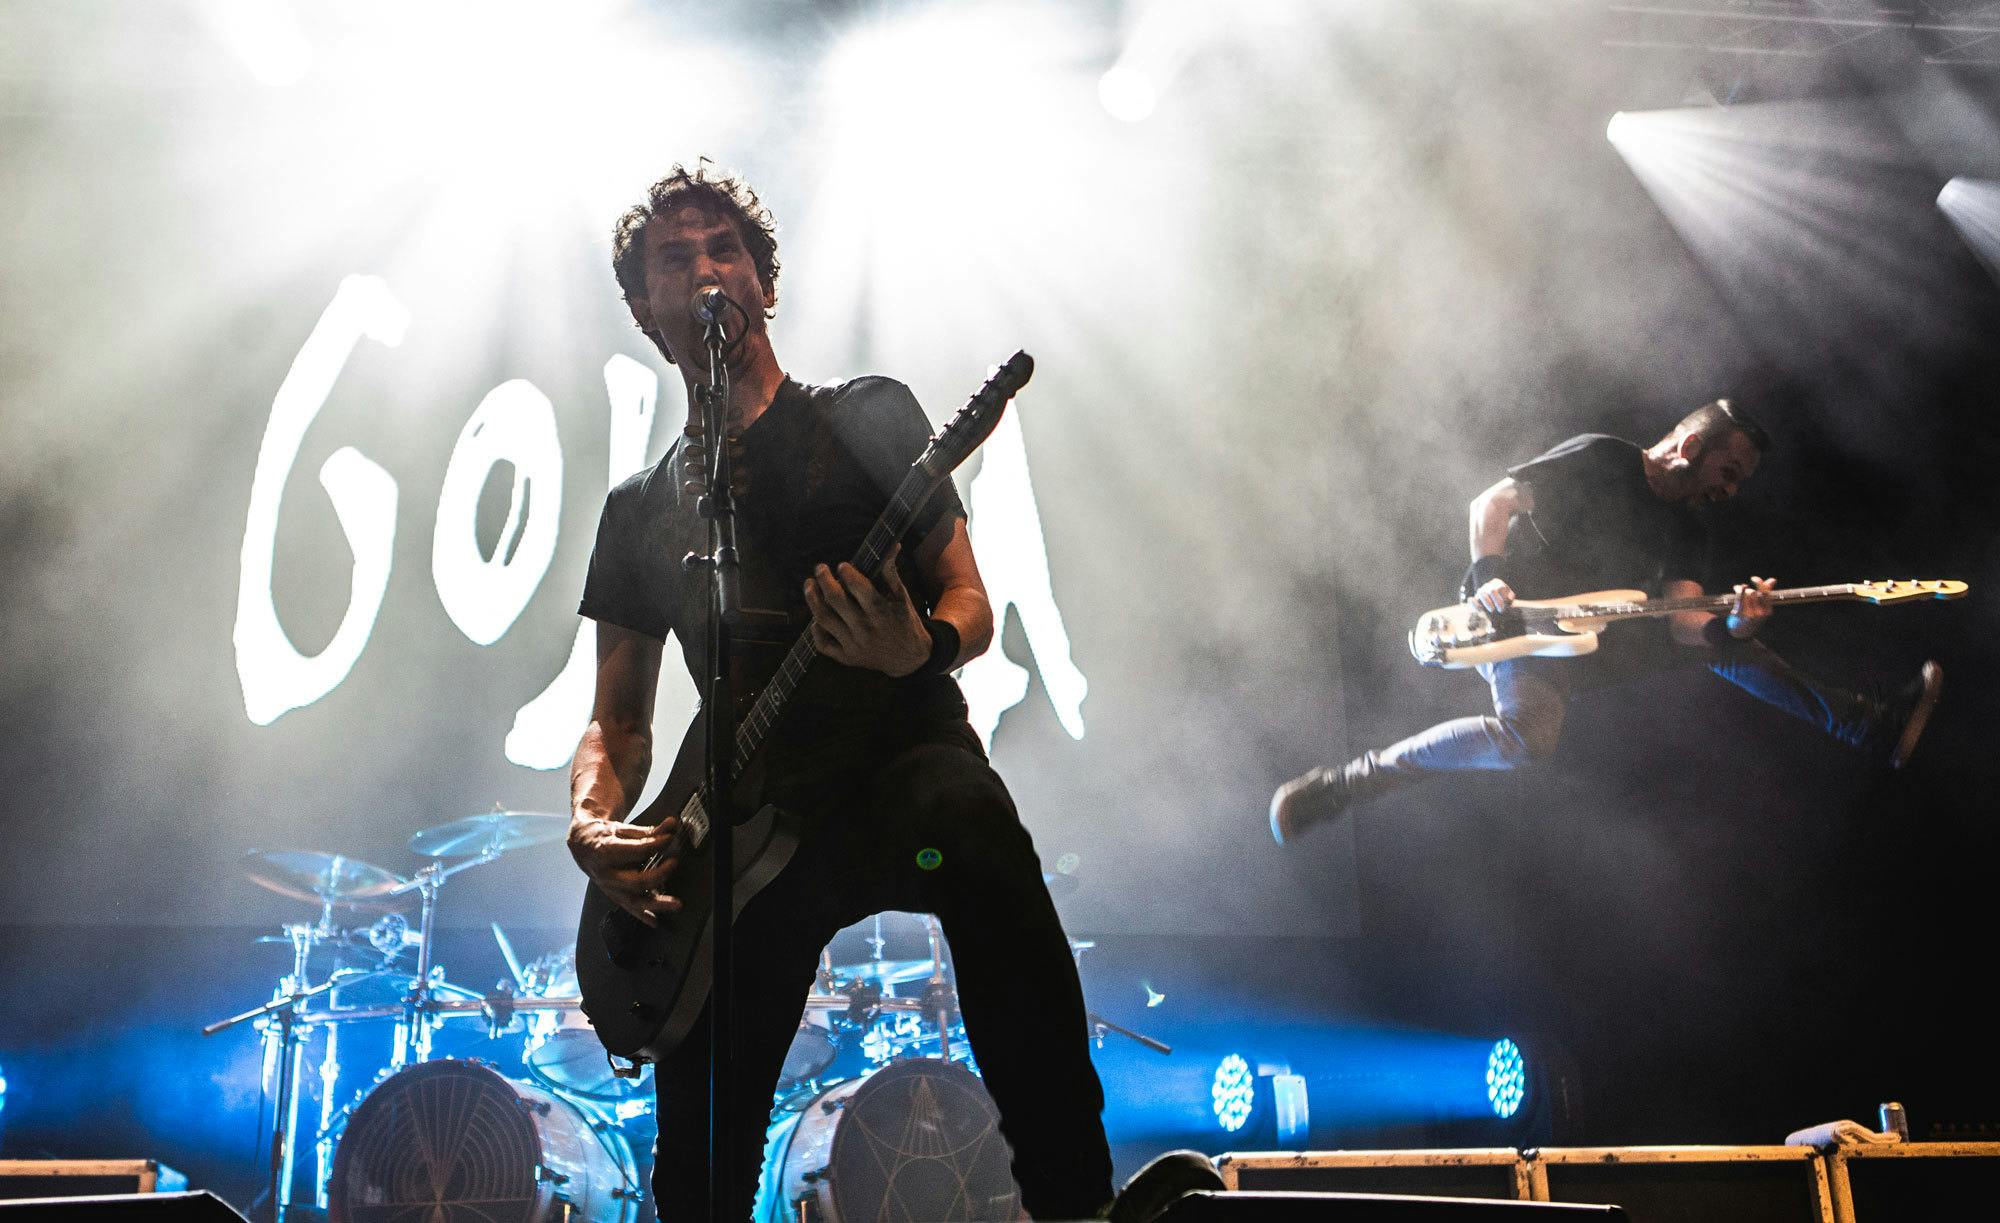 Gojira Cancel All 2020 Touring Plans